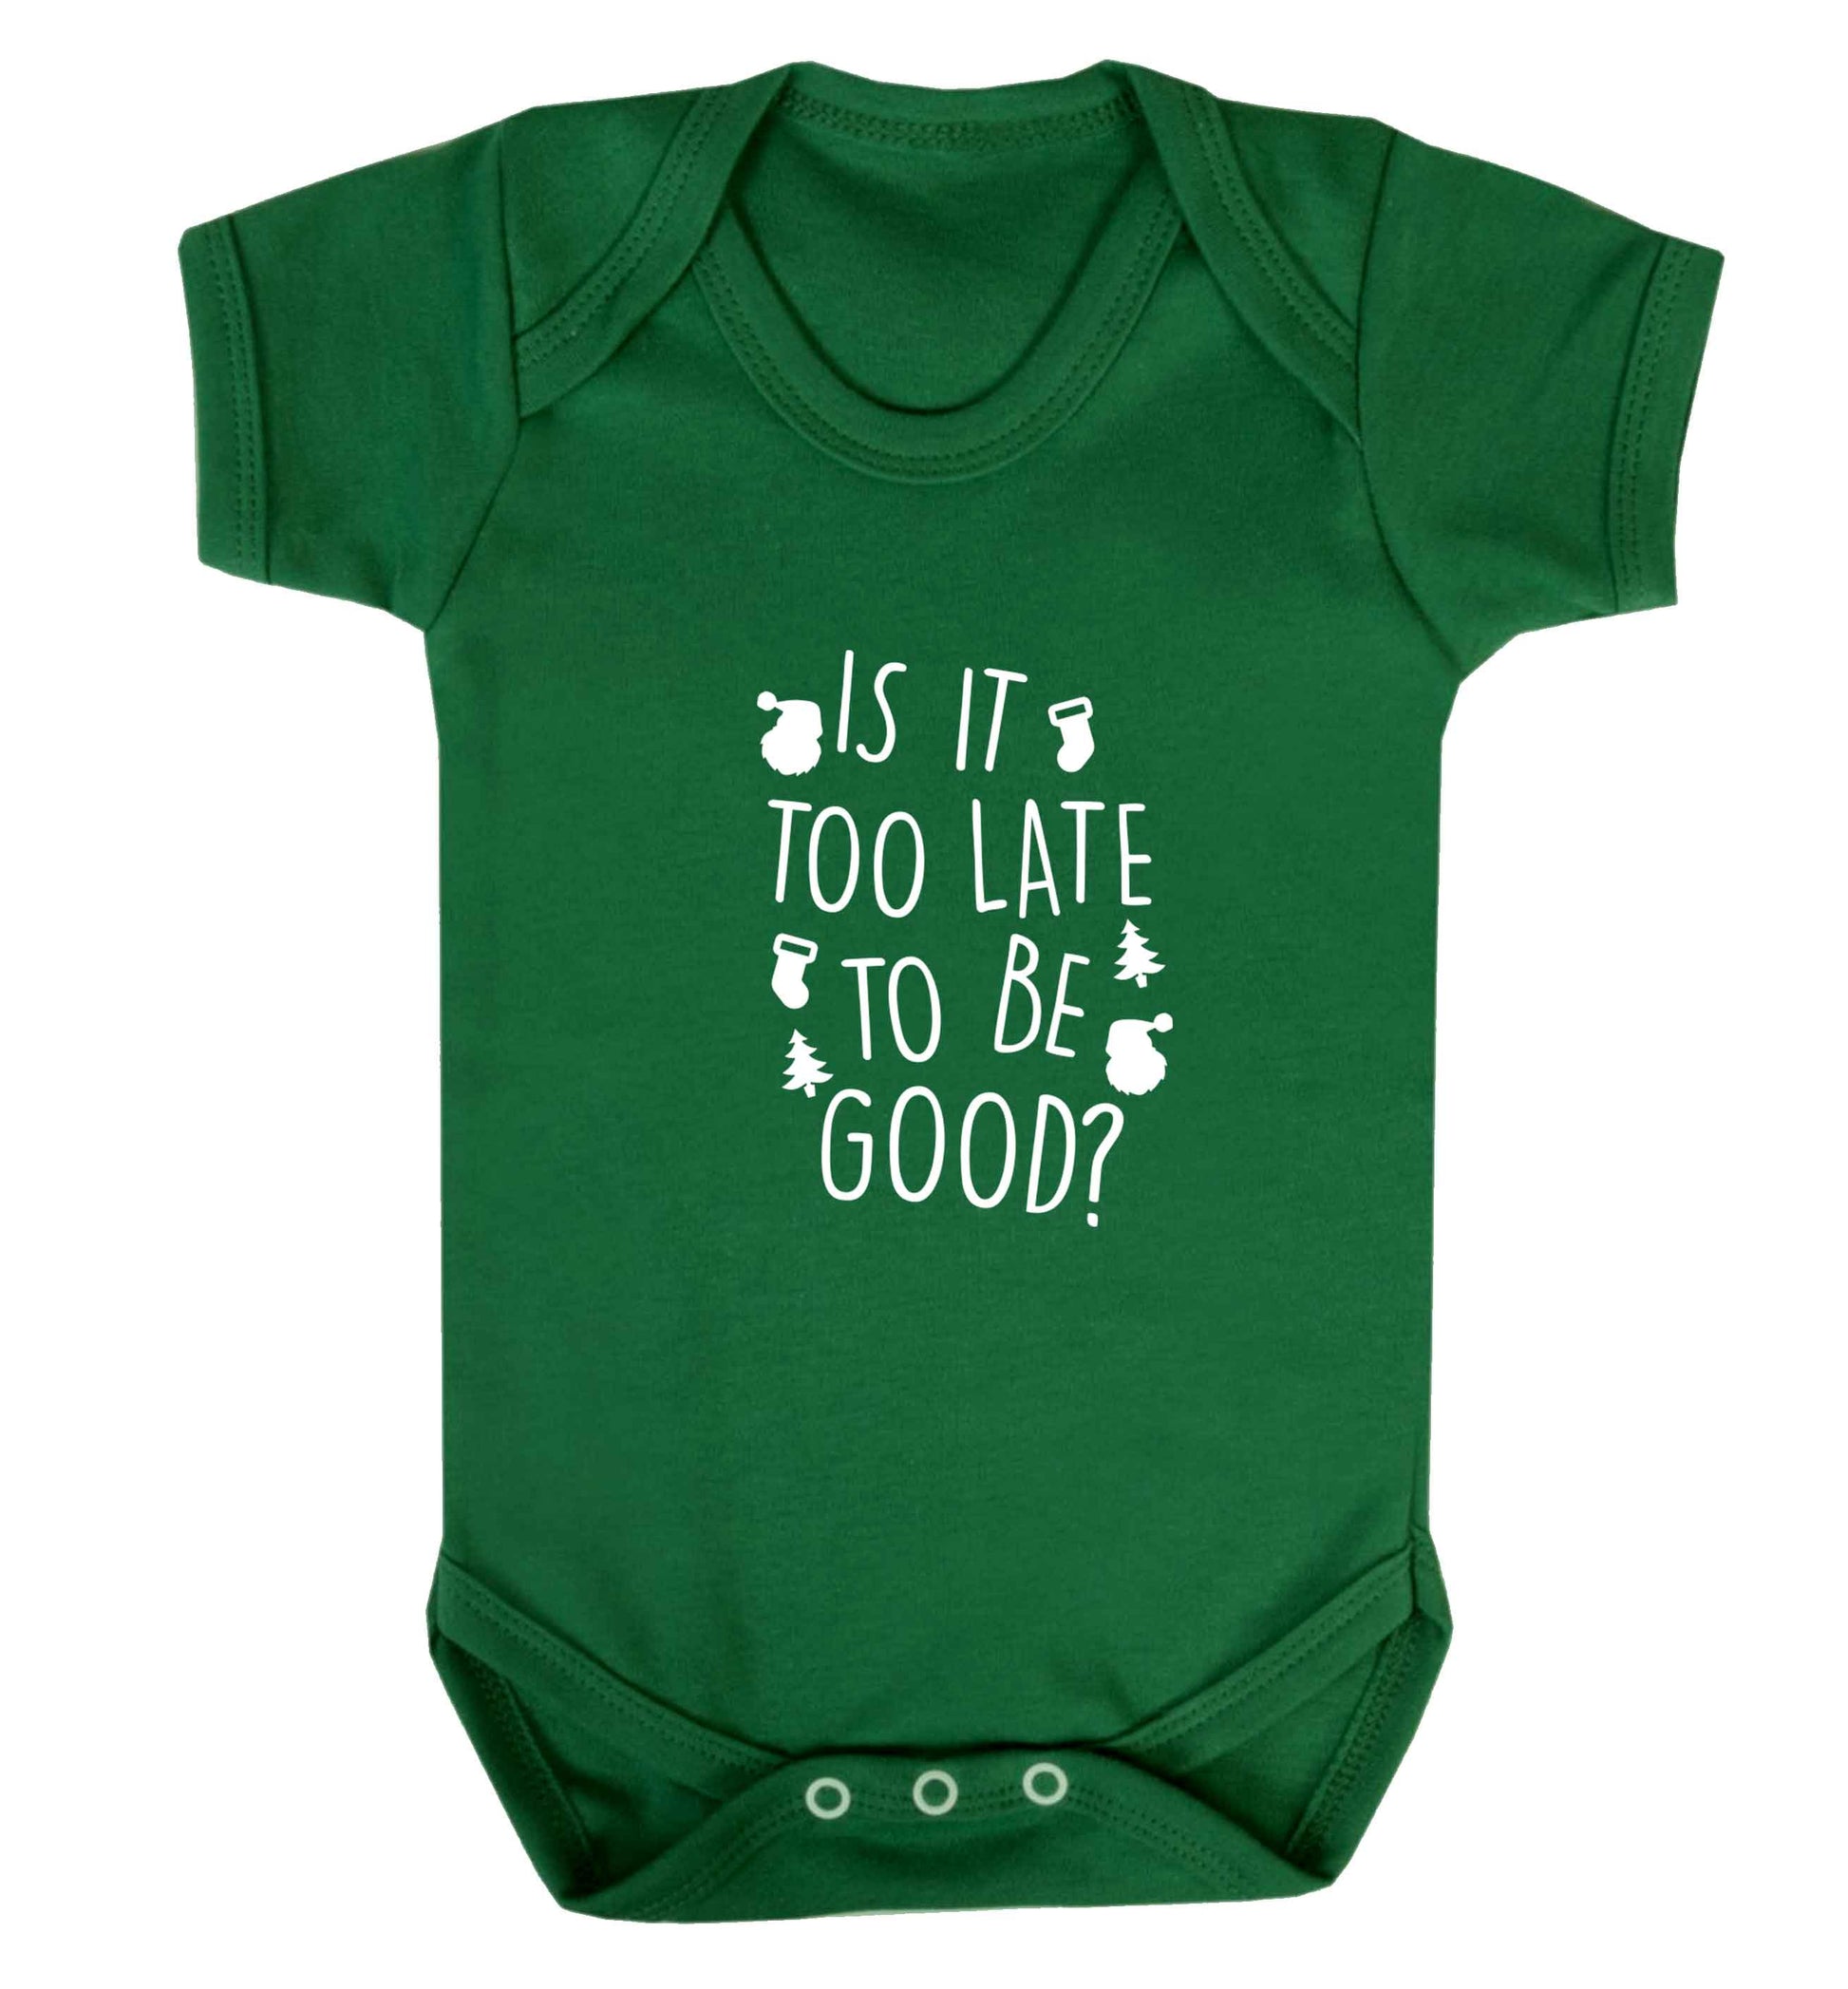 Too Late to be Good baby vest green 18-24 months